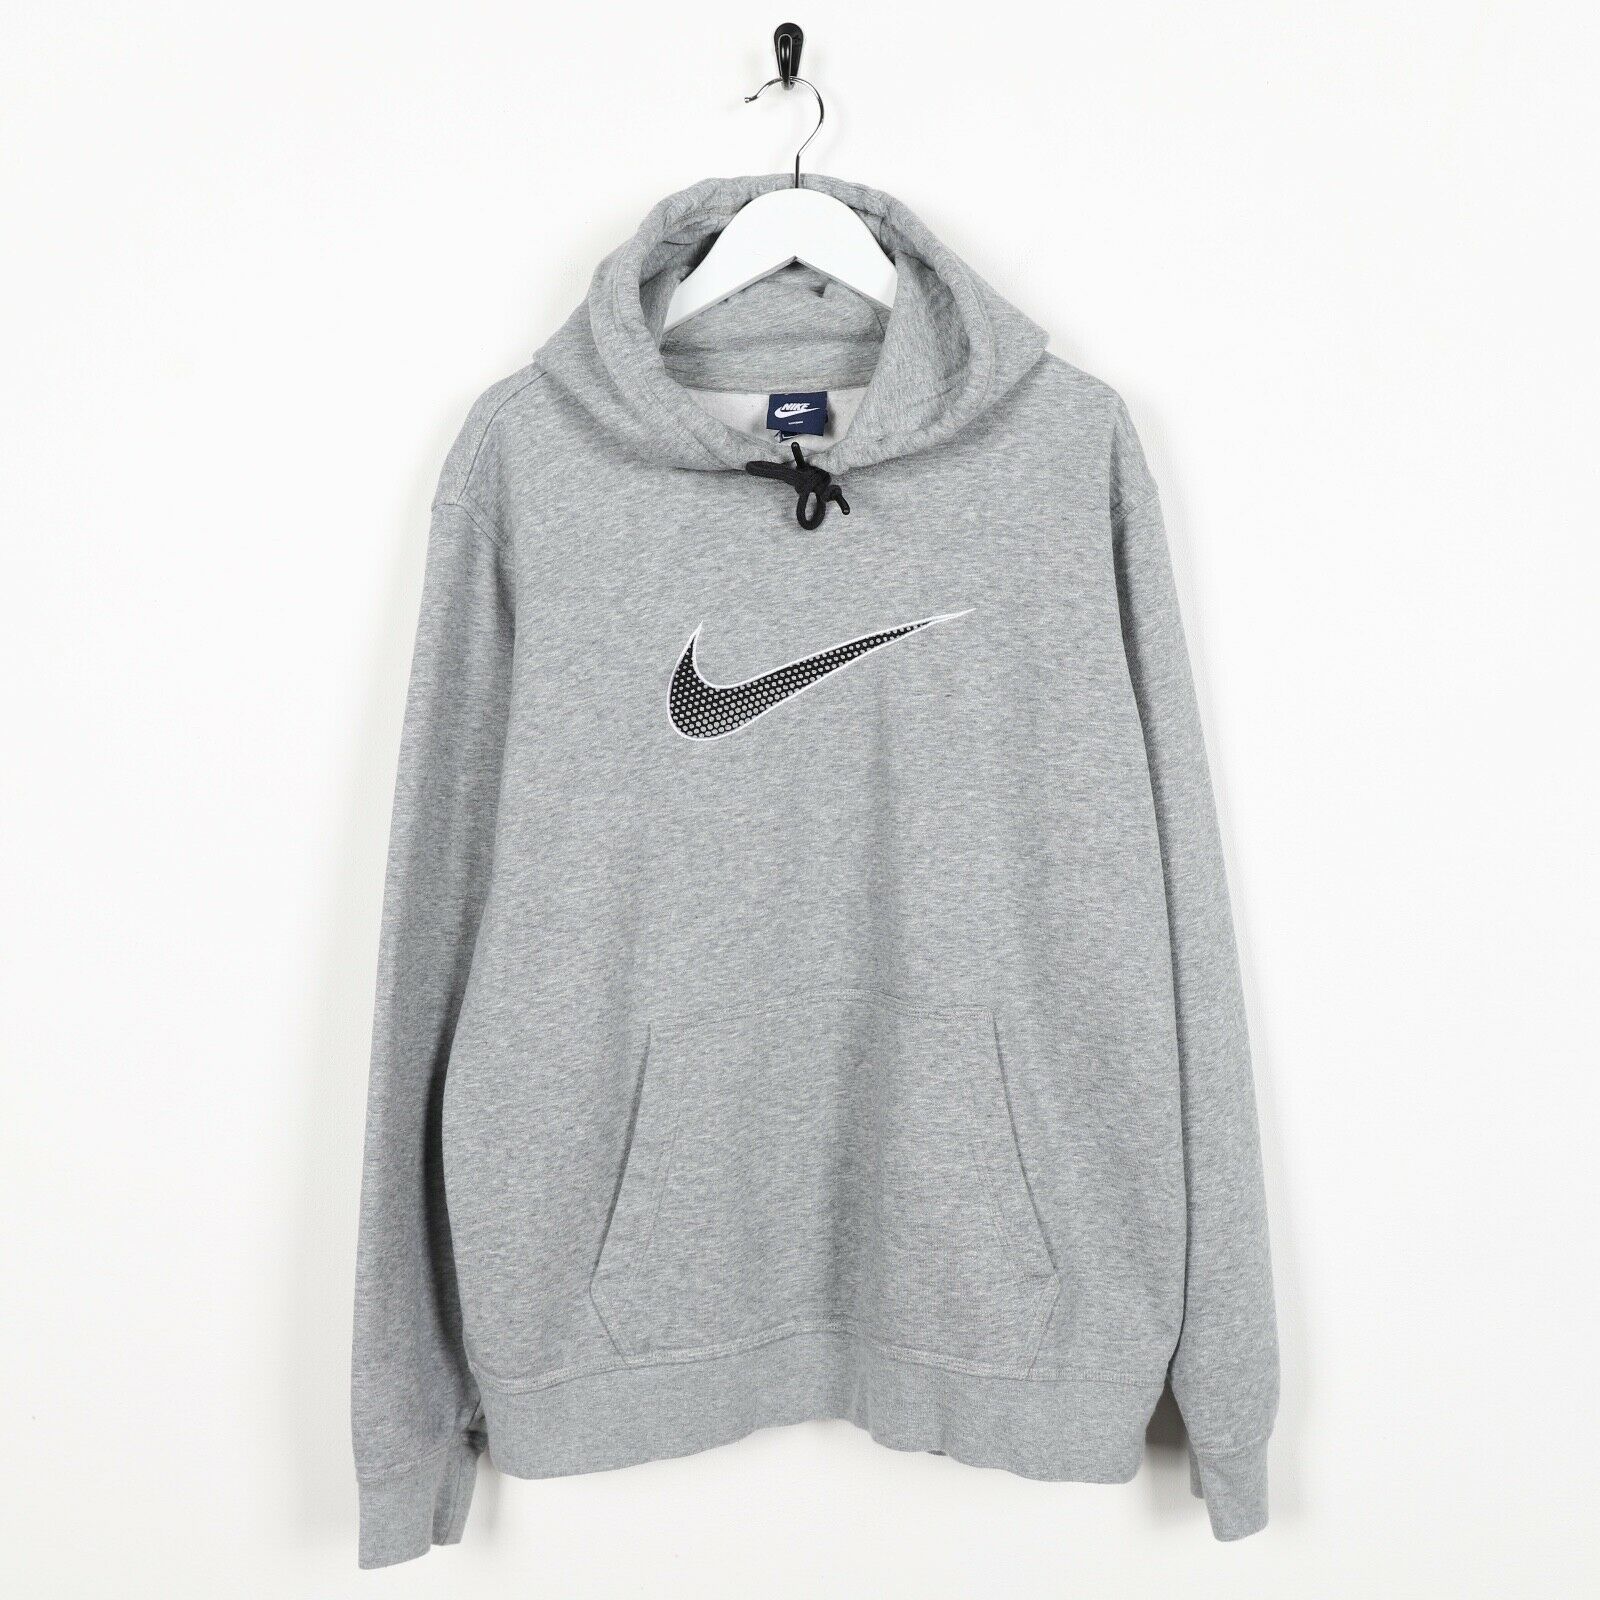 nike central swoosh